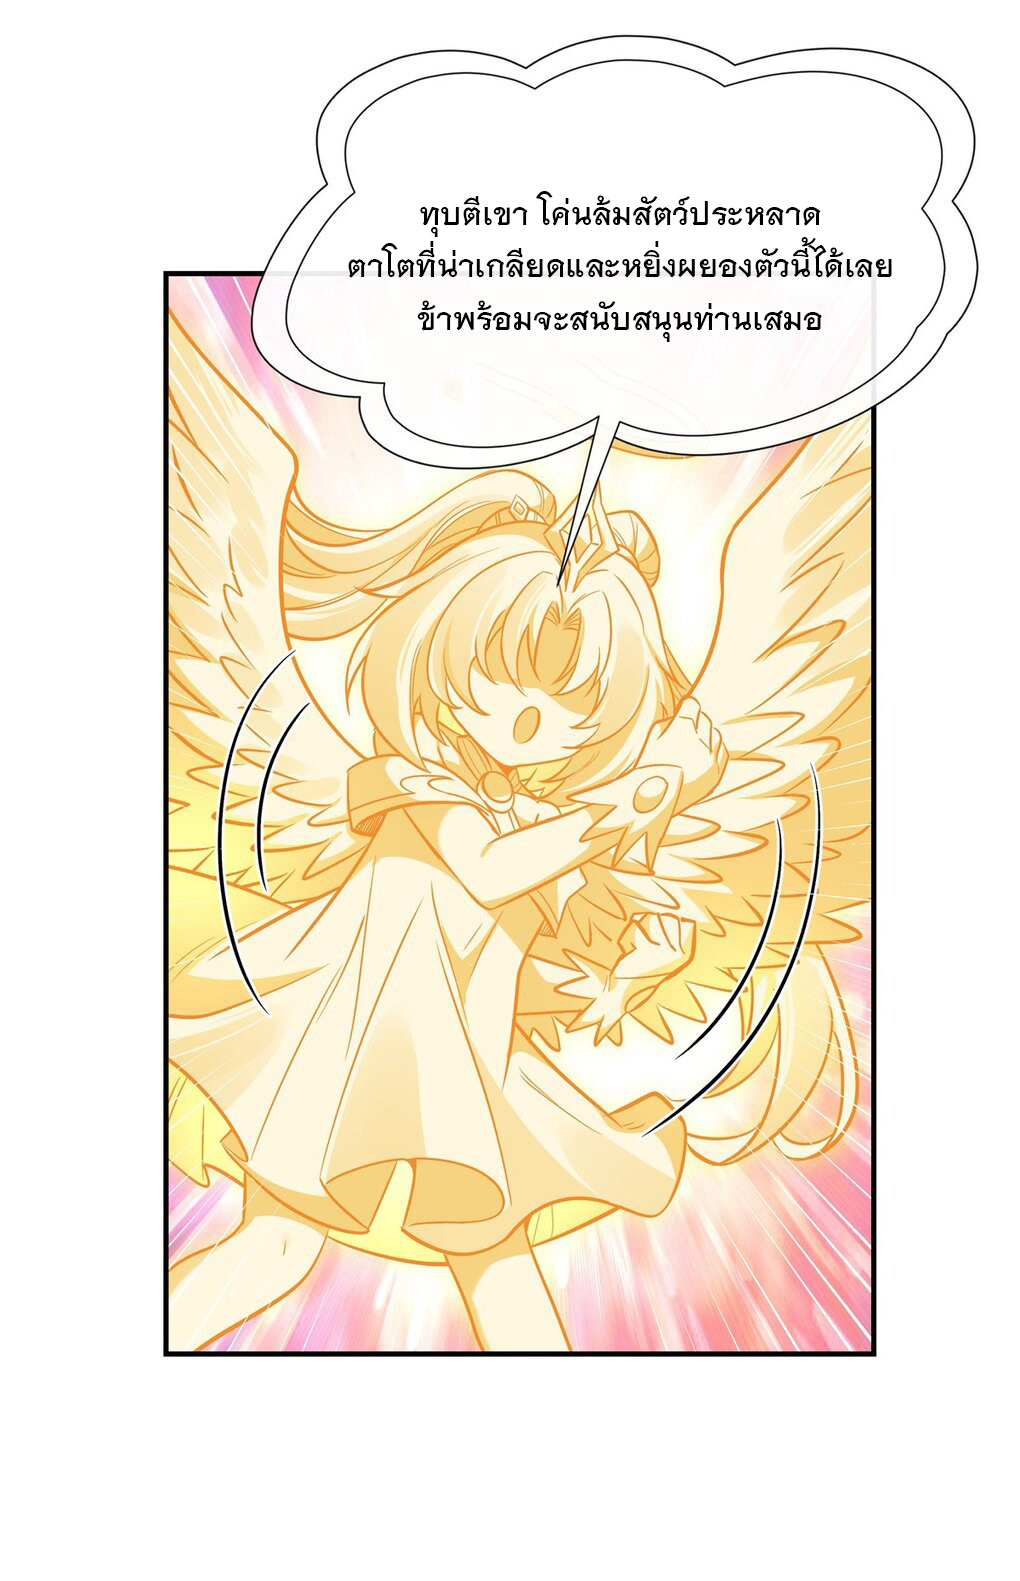 My Female Apprentices Are All Big Shots From the Future Ã Â¸â€¢Ã Â¸Â­Ã Â¸â„¢Ã Â¸â€”Ã Â¸ÂµÃ Â¹Ë† 99 (9)